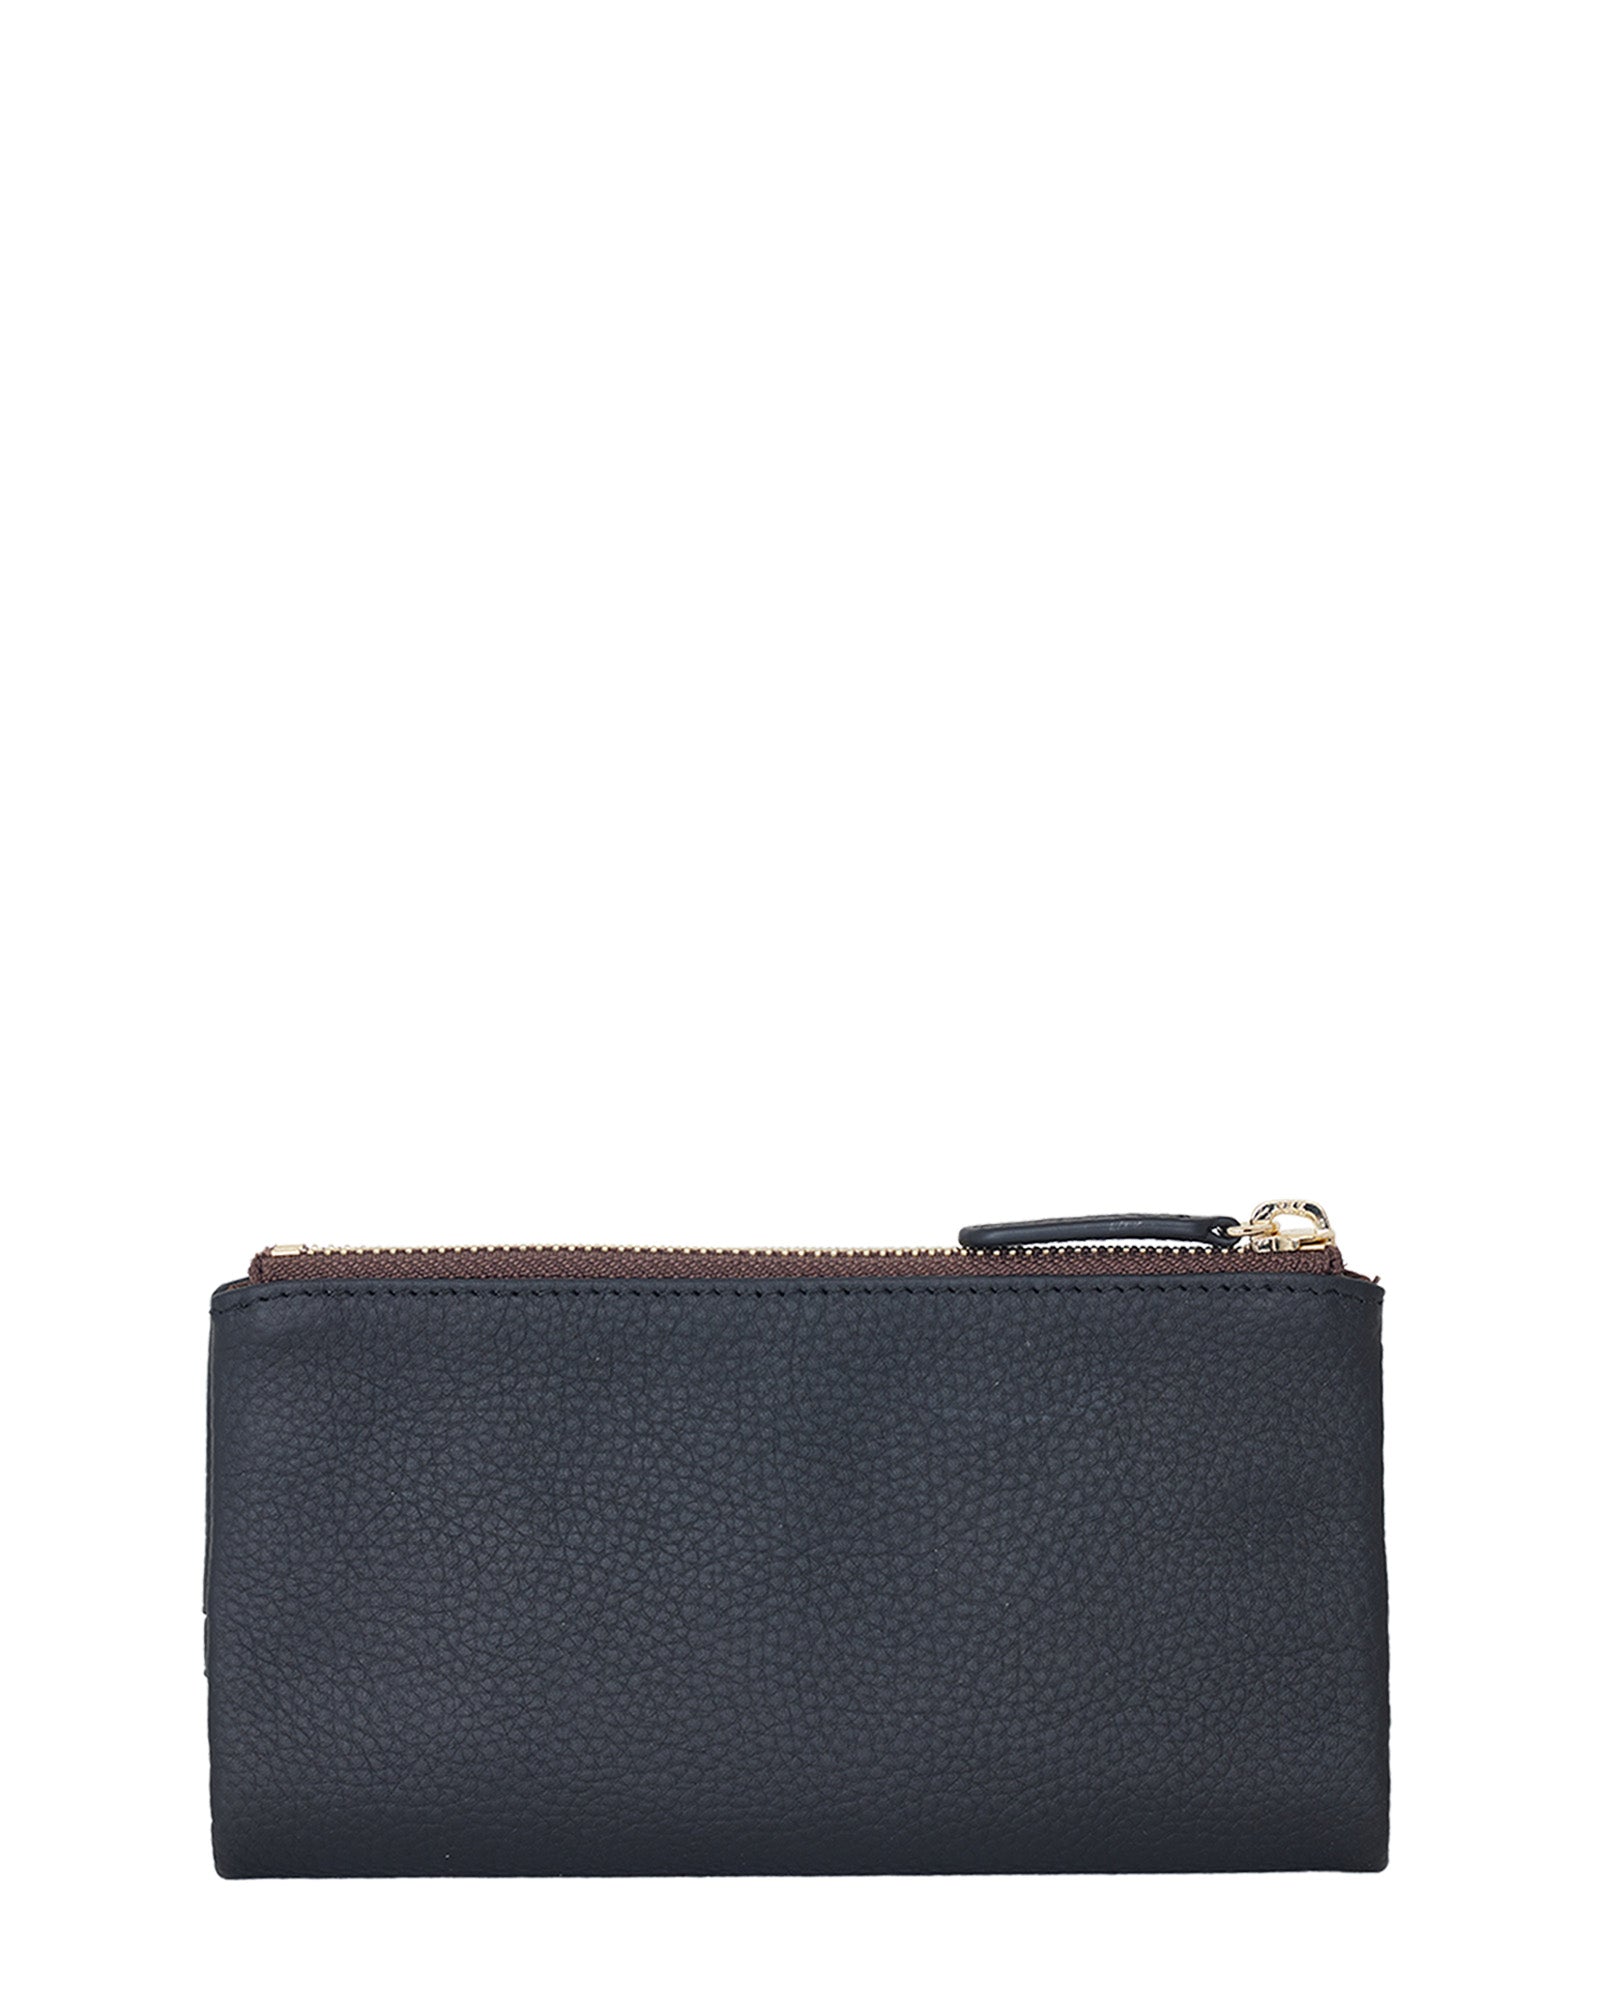 Sam Wallet | Saben | Luxury Leather Handbags and Accessories